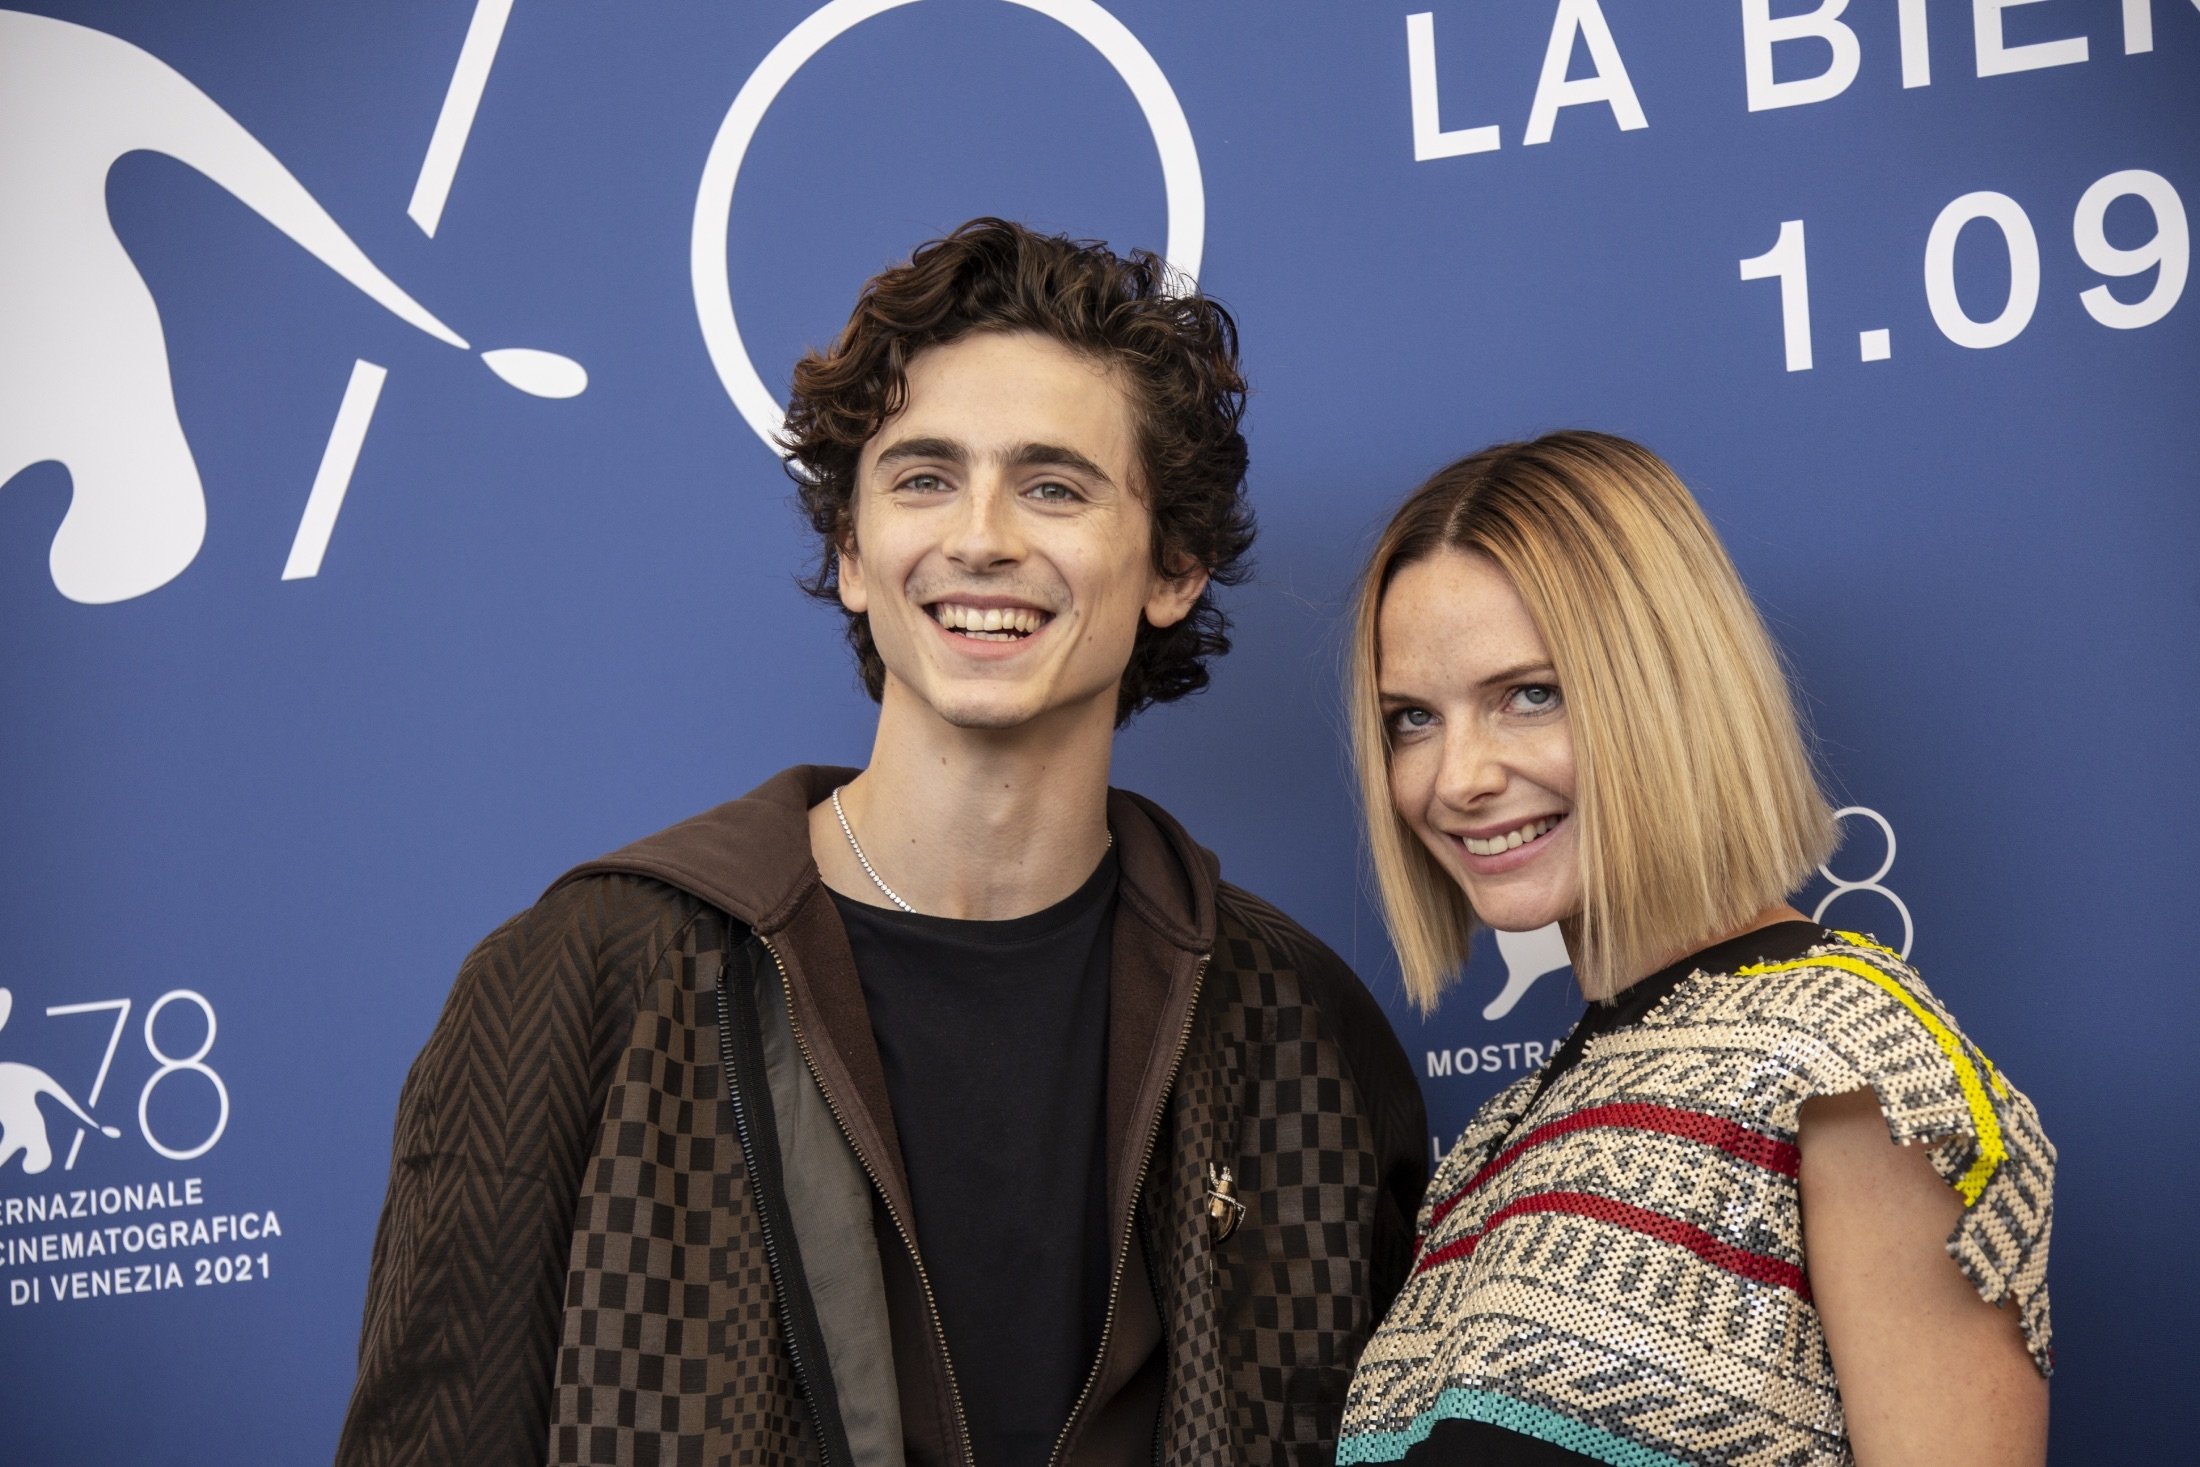 Timothee Chalamet (L), and Rebecca Ferguson pose for photographers at the photocell for the film “Dune” at the 78th Venice Film Festival, in Venice, Italy, Sept. 3, 2021. (AP Photo)